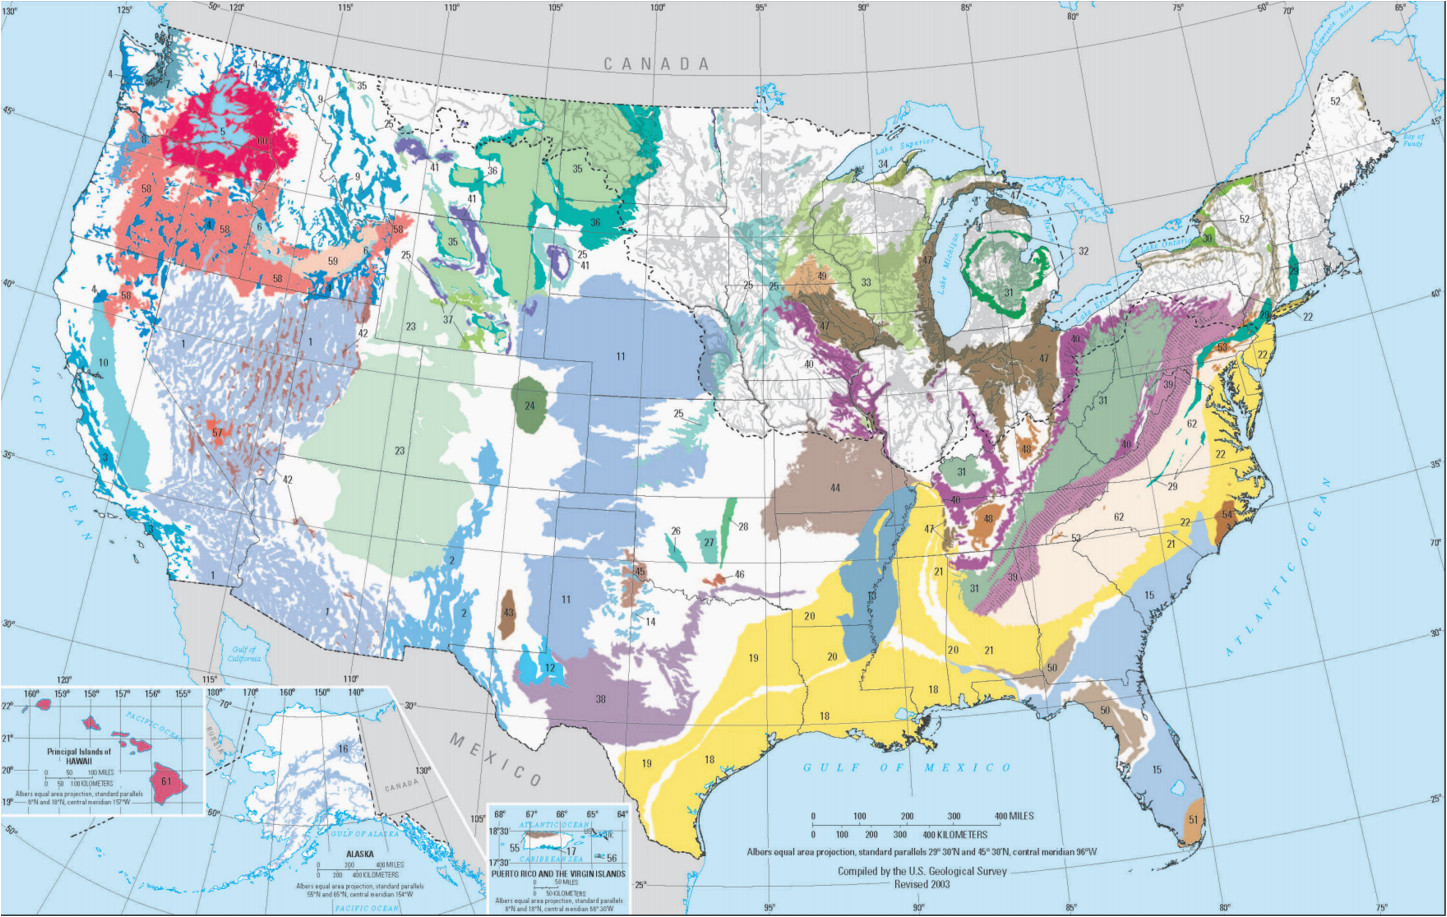 Texas Aquifer Map California Water Resources Map National Aquifers Of the United